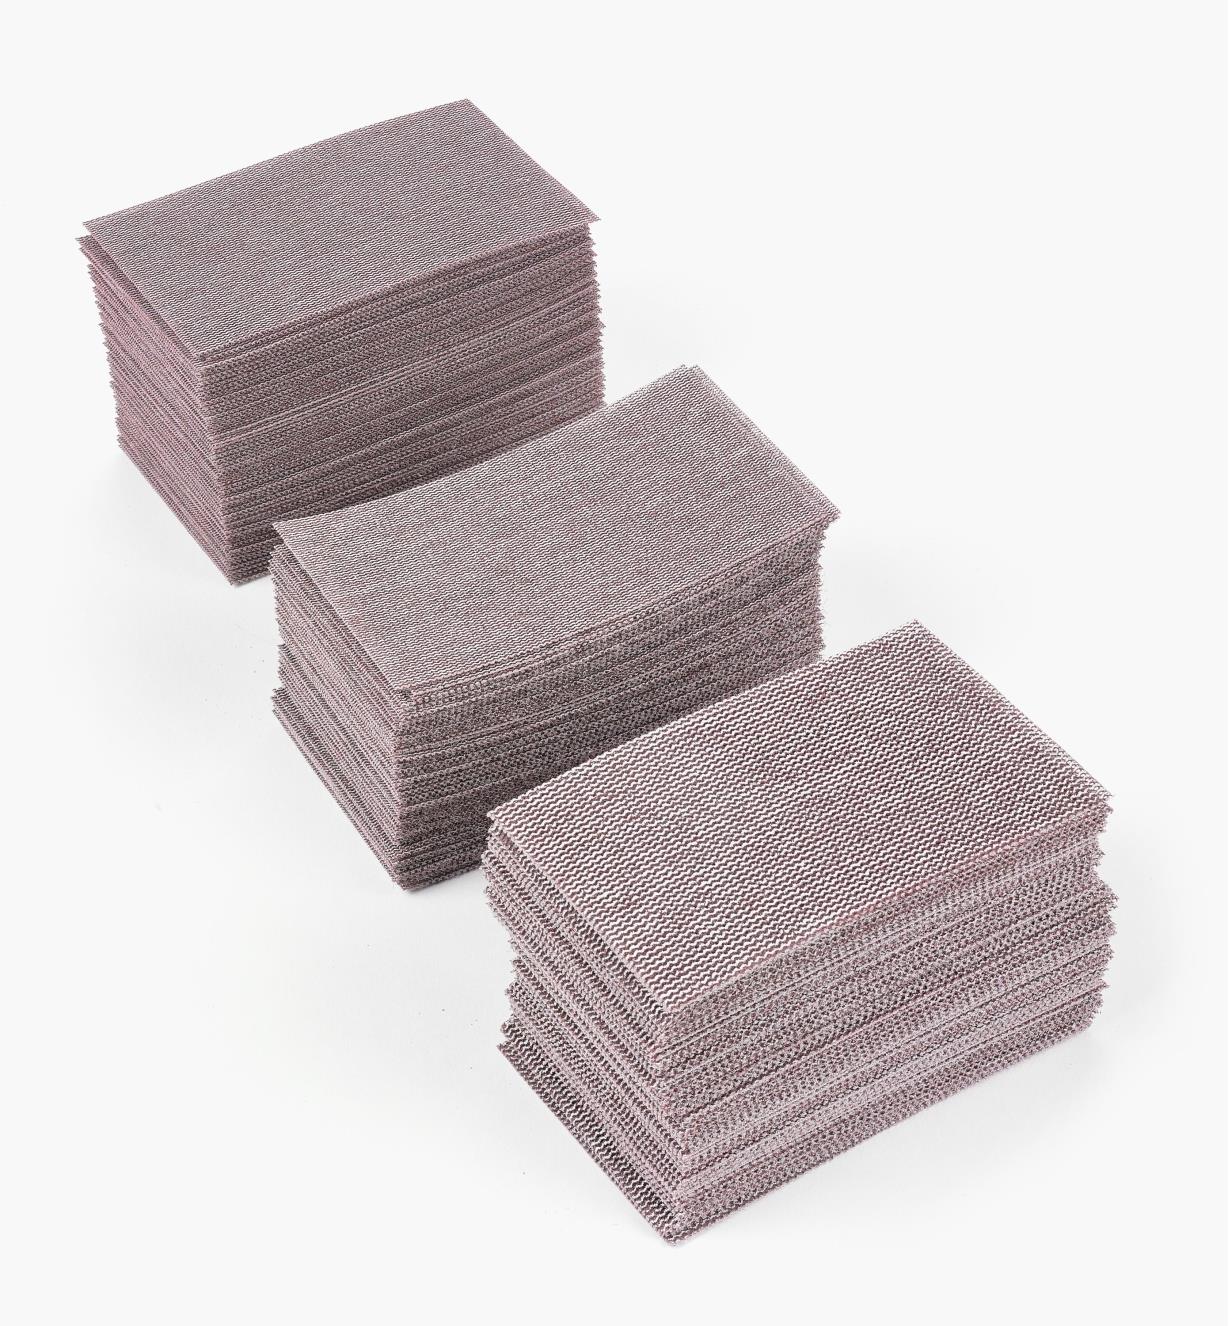 50 each of the 80x, 120x and 150x Abranet Grip mesh abrasive sheets